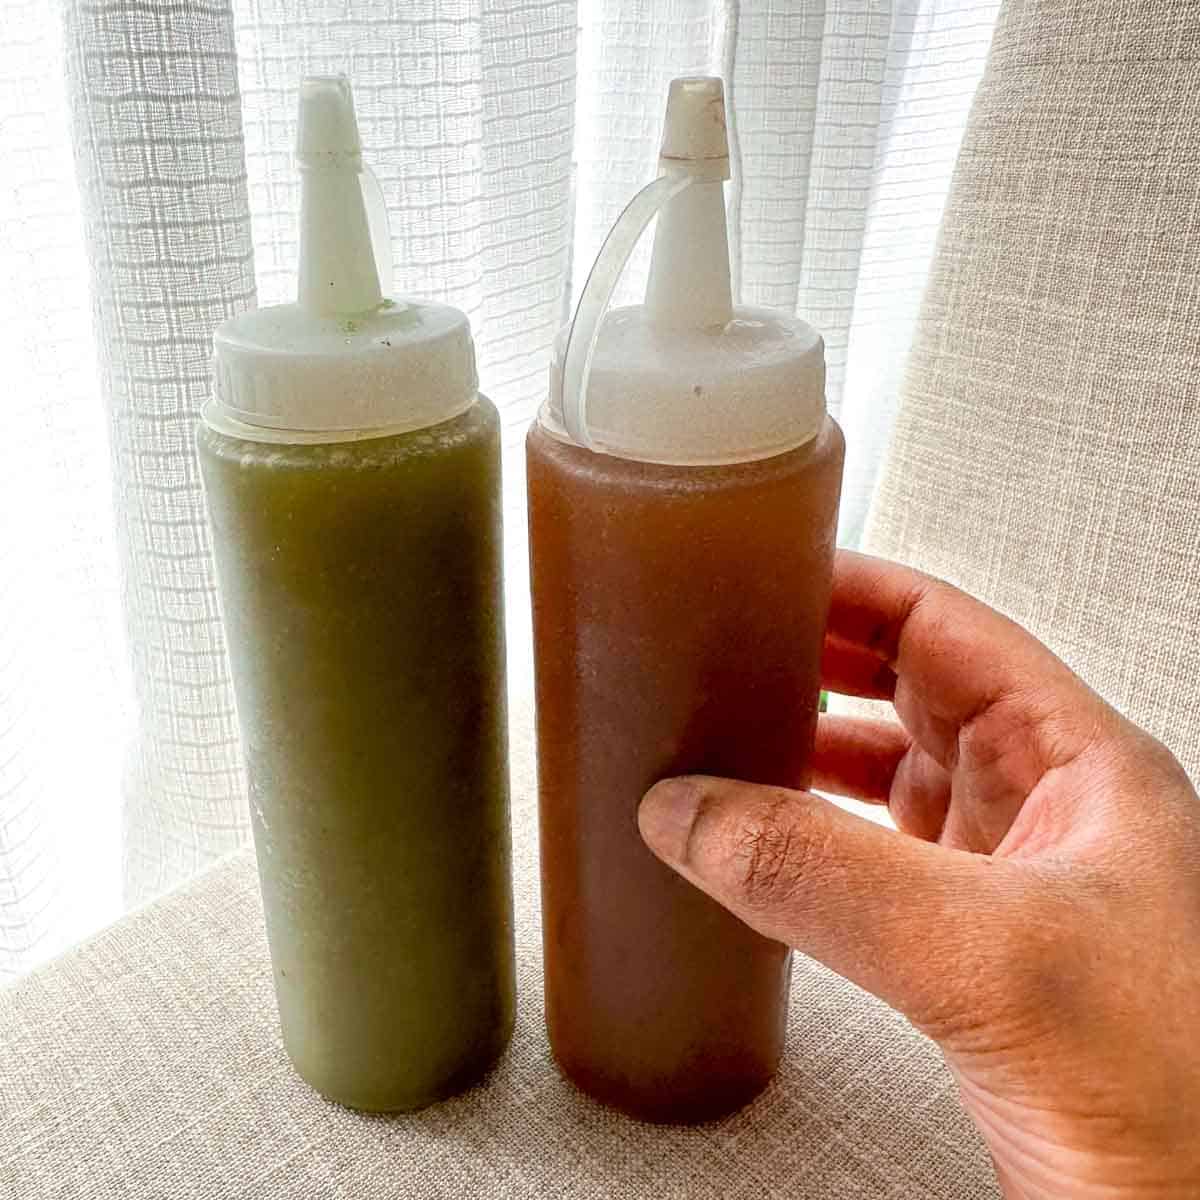 Two squeeze bottles filled with pani. Left bottle has spicy green pani and right bottle has sweet tamarind pani